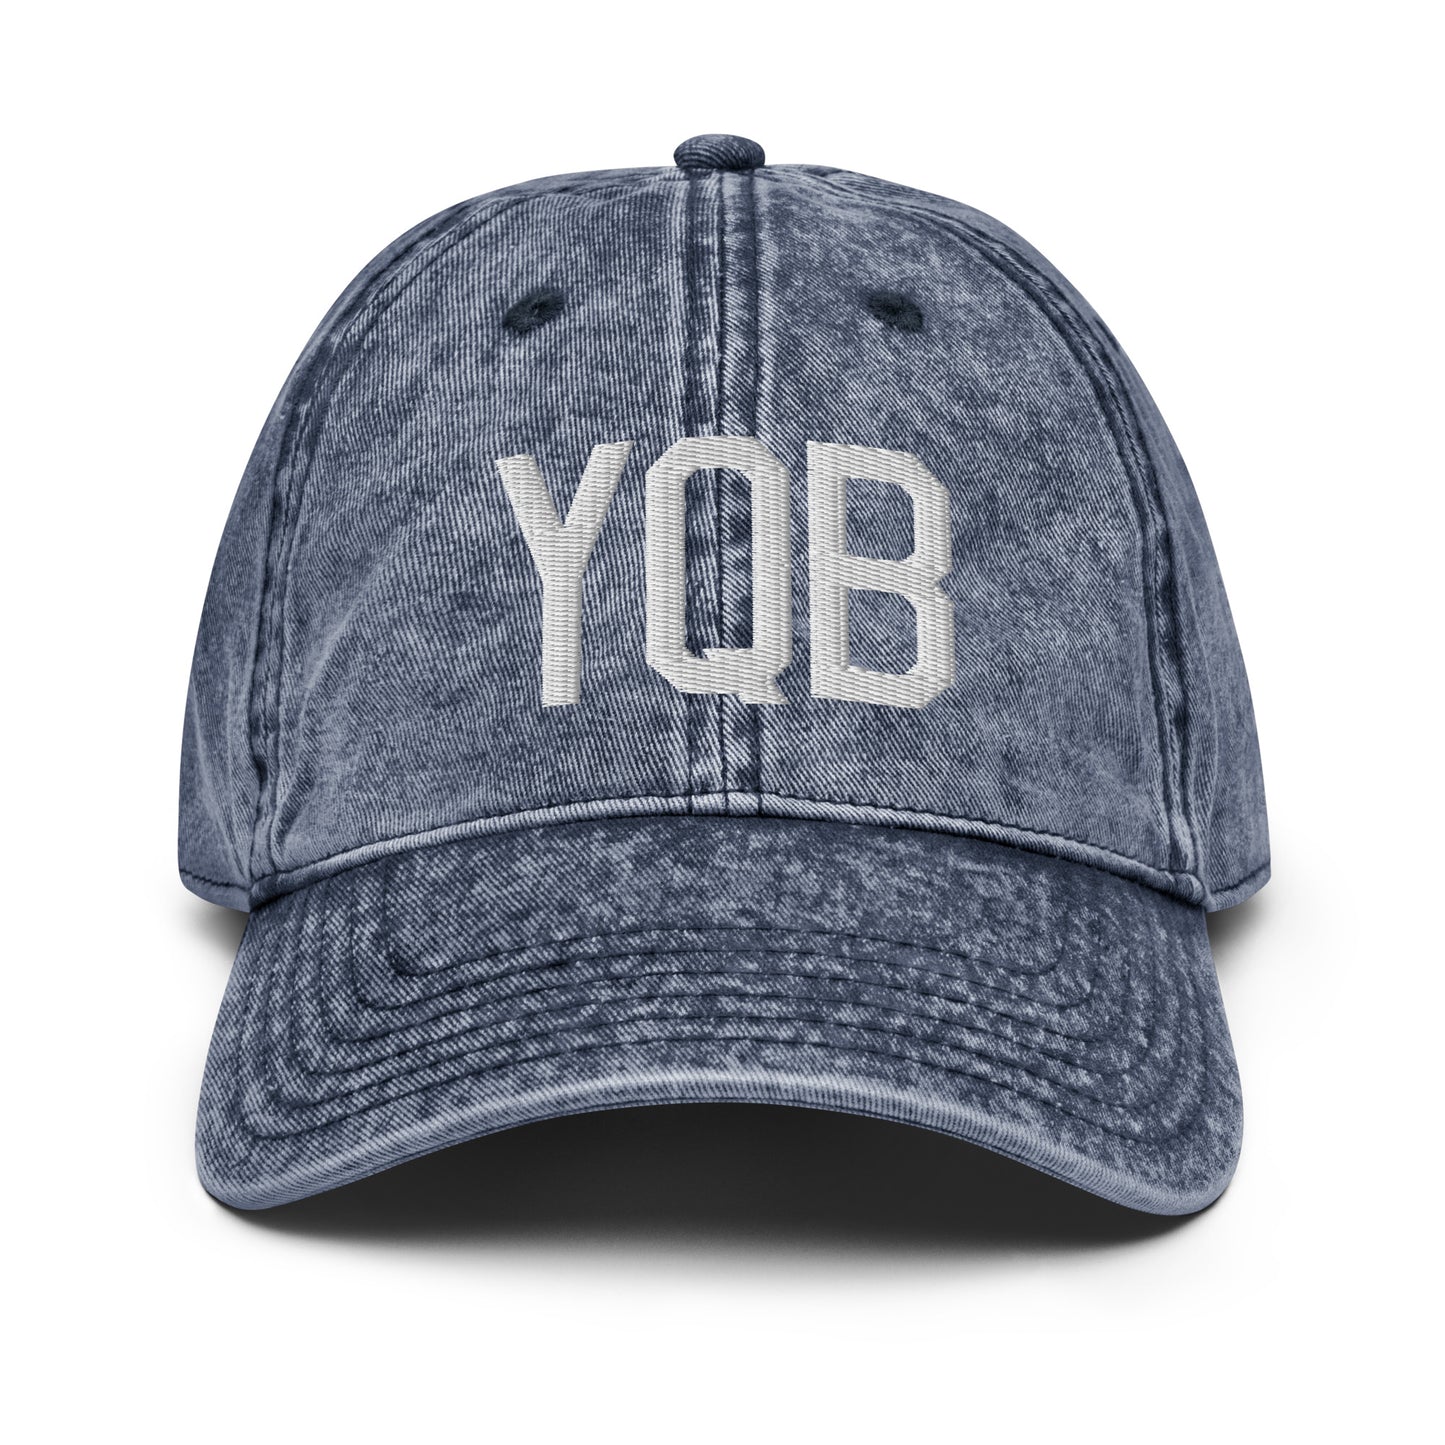 Airport Code Twill Cap - White • YQB Quebec City • YHM Designs - Image 16